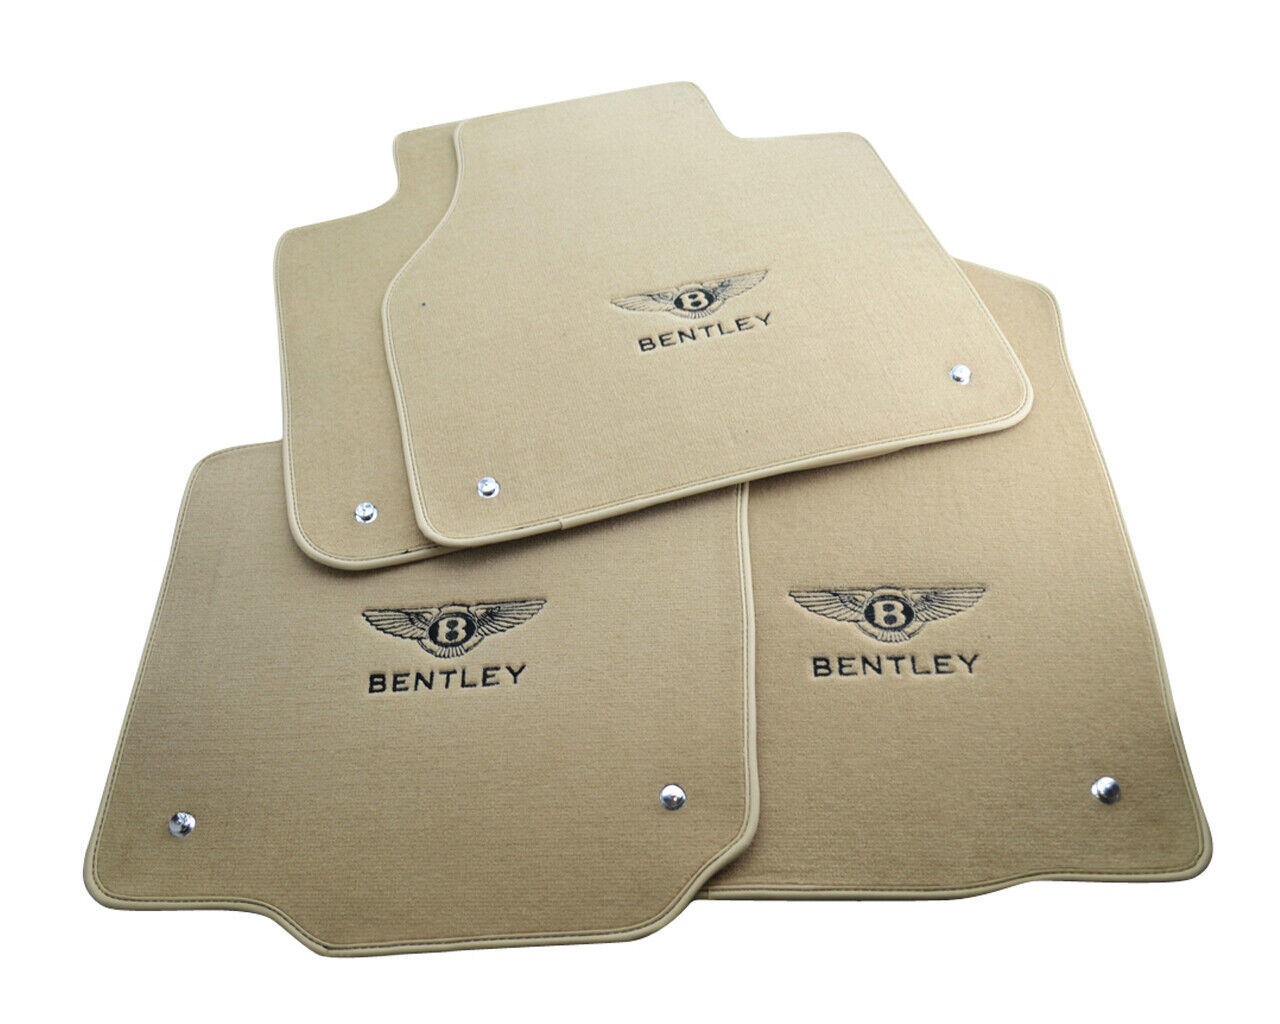 Floor Mats For Bentley Flying Spur Tailored Beige Carpets With Emblem LHD NEW 